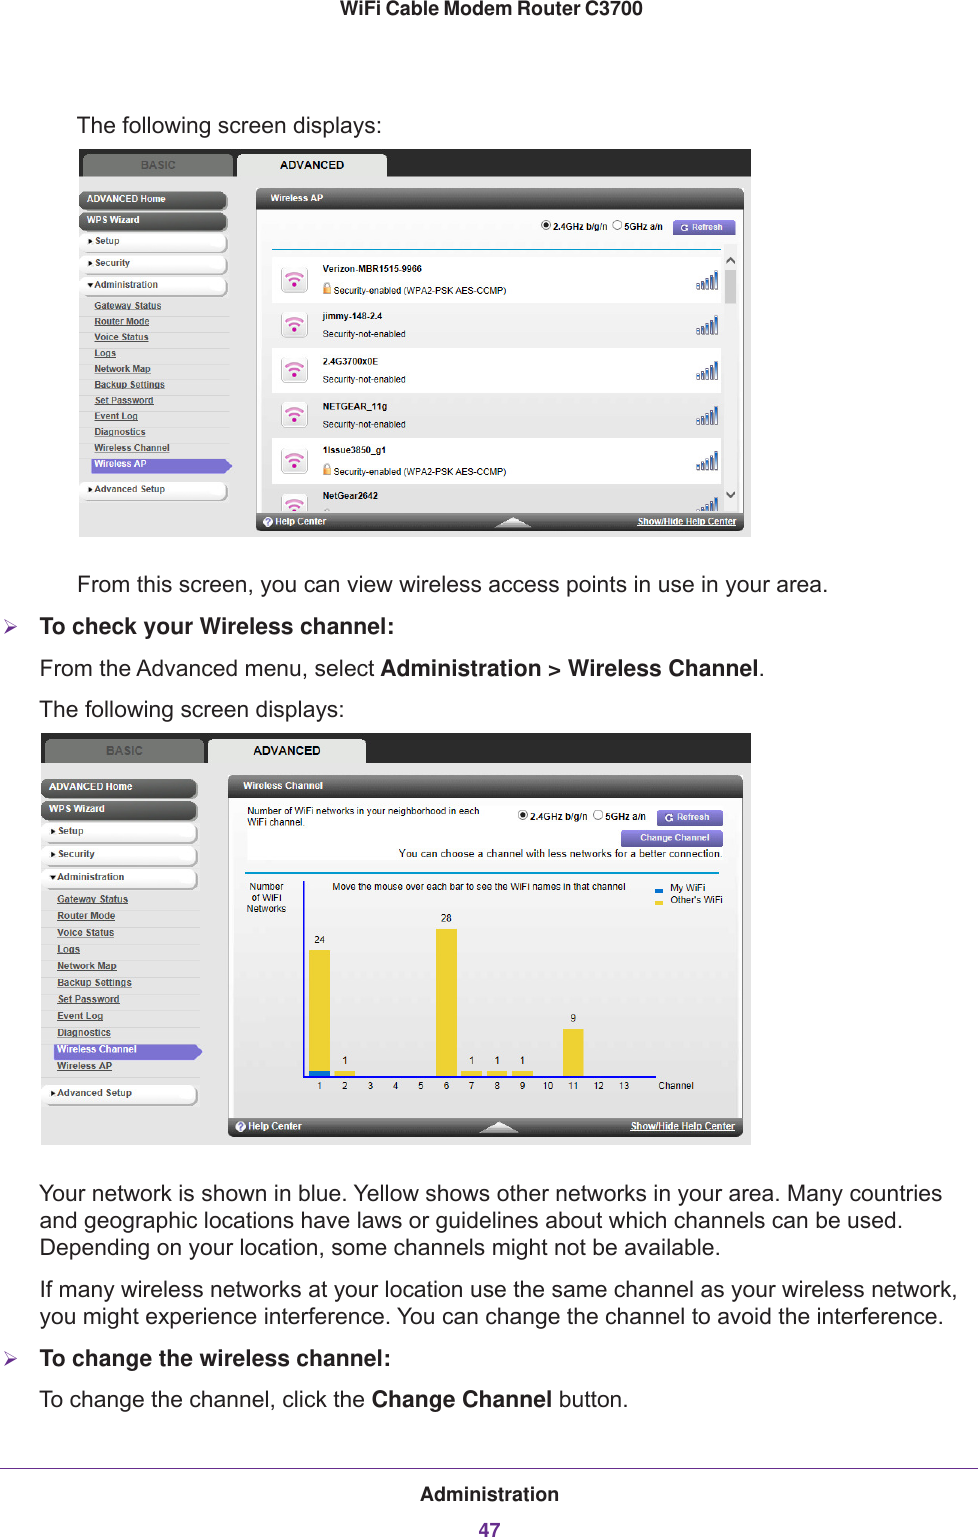 Administration47 WiFi Cable Modem Router C3700The following screen displays:From this screen, you can view wireless access points in use in your area. To check your Wireless channel:From the Advanced menu, select Administration &gt; Wireless Channel.The following screen displays:Your network is shown in blue. Yellow shows other networks in your area. Many countries and geographic locations have laws or guidelines about which channels can be used. Depending on your location, some channels might not be available.If many wireless networks at your location use the same channel as your wireless network, you might experience interference. You can change the channel to avoid the interference.To change the wireless channel:To change the channel, click the Change Channel button.